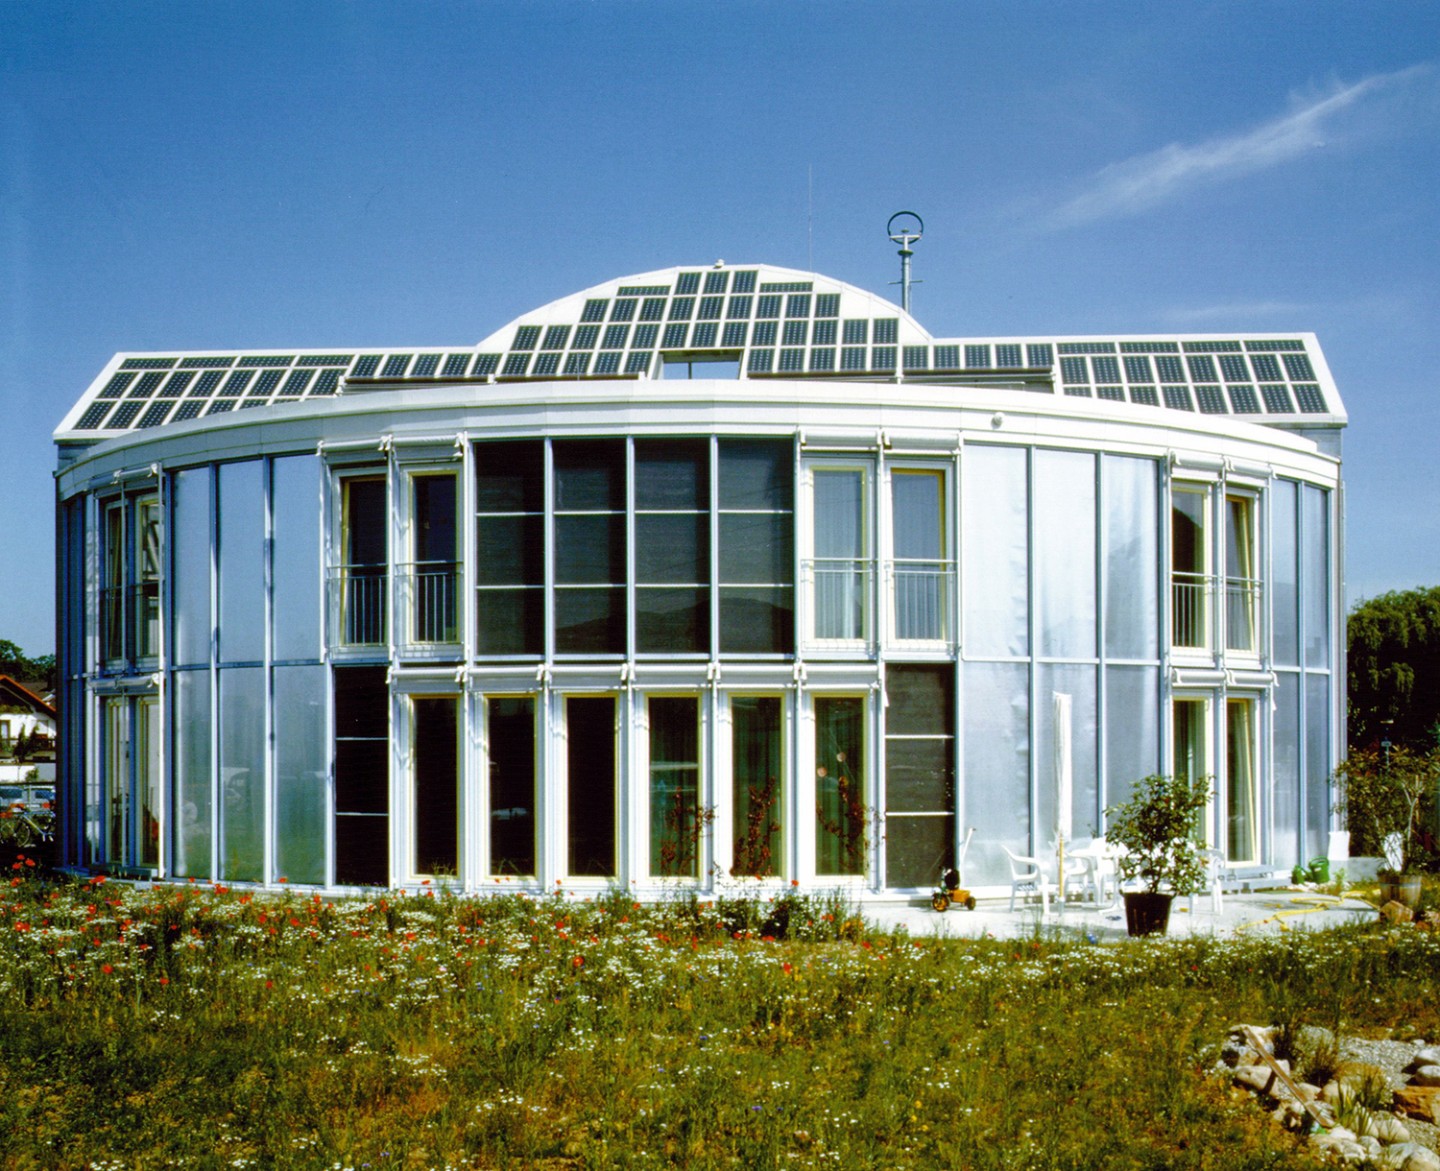 Completed in 1992, the solar house covers its entire energy needs from solar power.